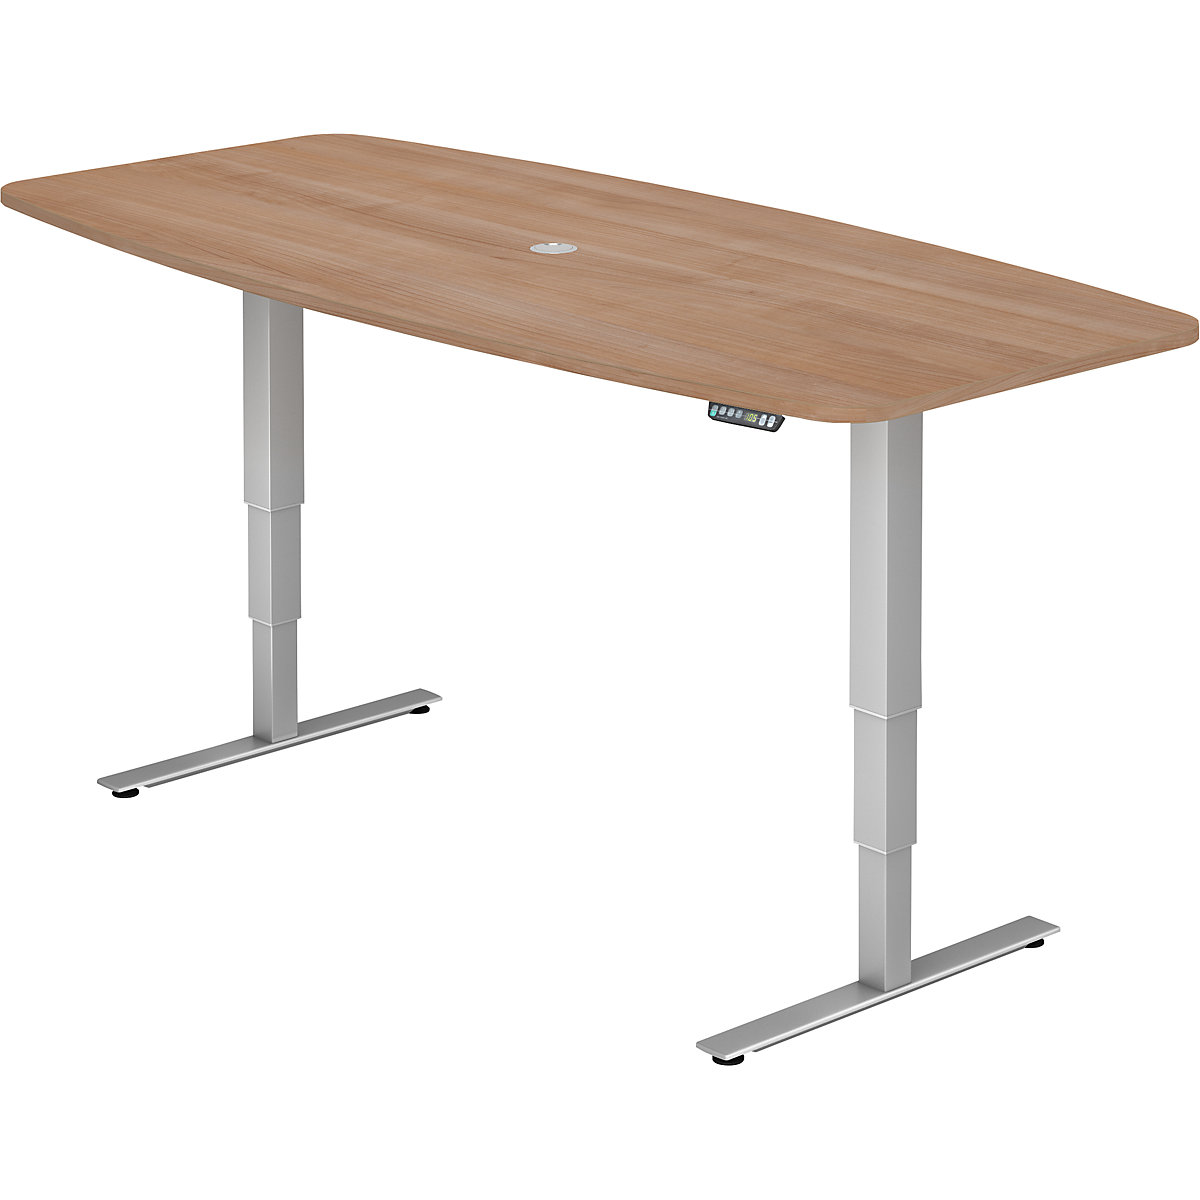 Conference table, WxD 2200 x 1030 mm, electric height adjustment from 620 – 1270 mm, walnut finish-6